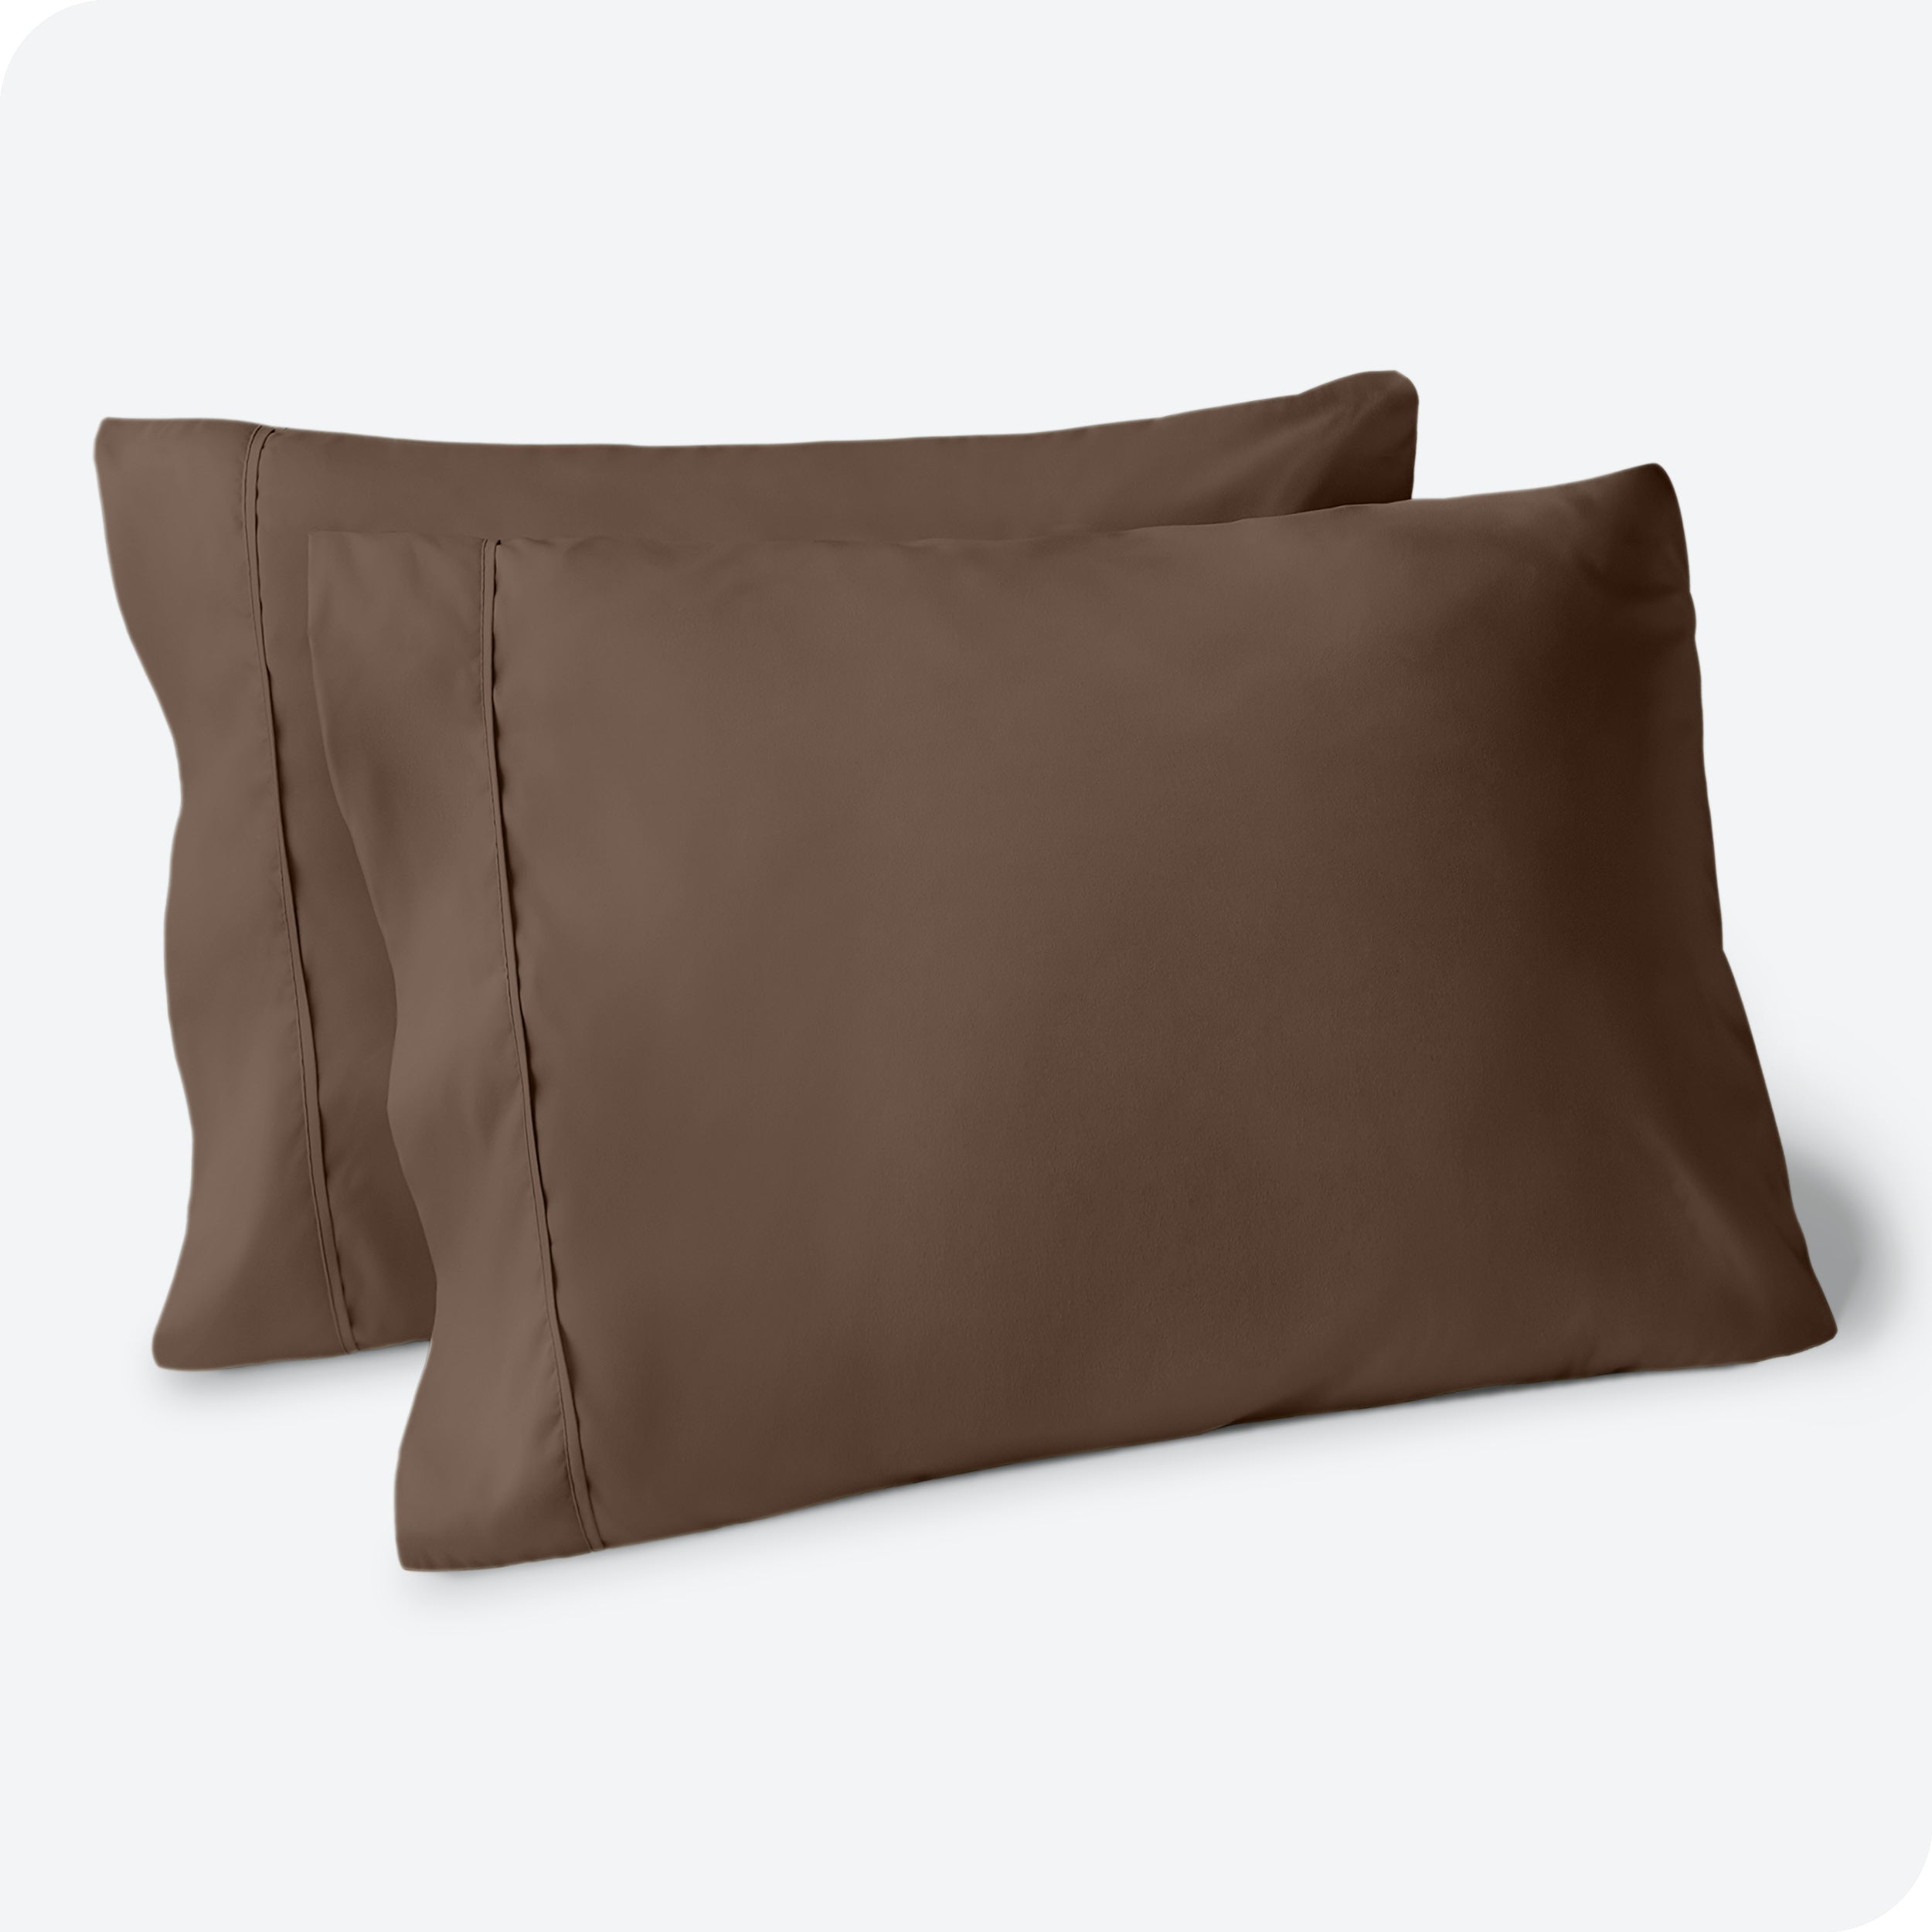 Two pillows on a white background with cocoa pillowcases on them